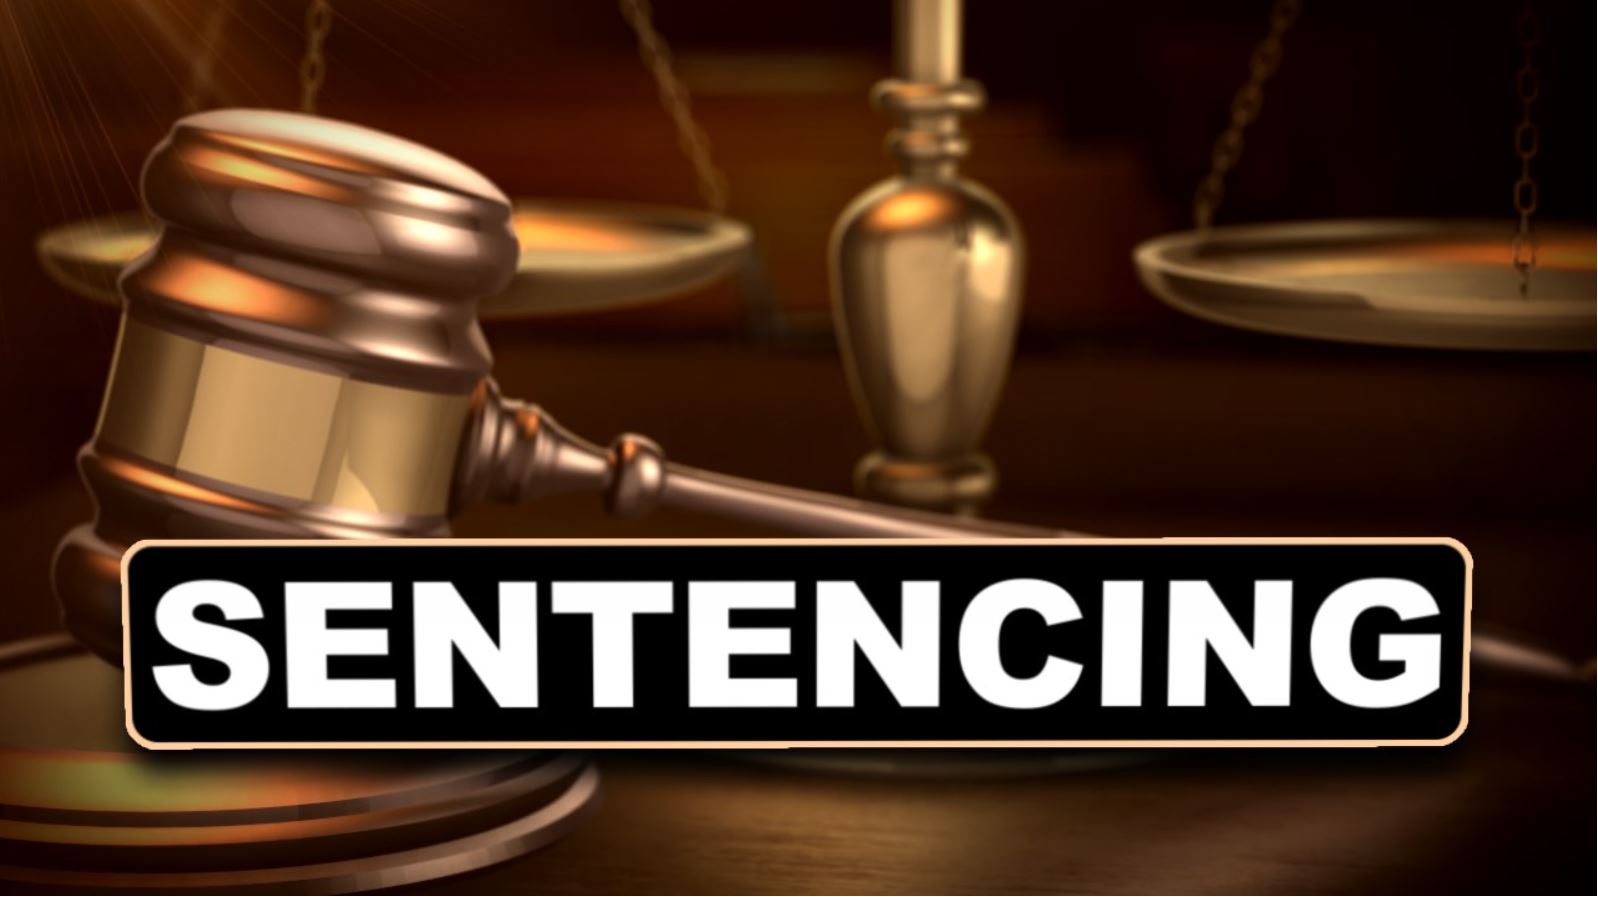 Company director sentenced for pension funds fraud